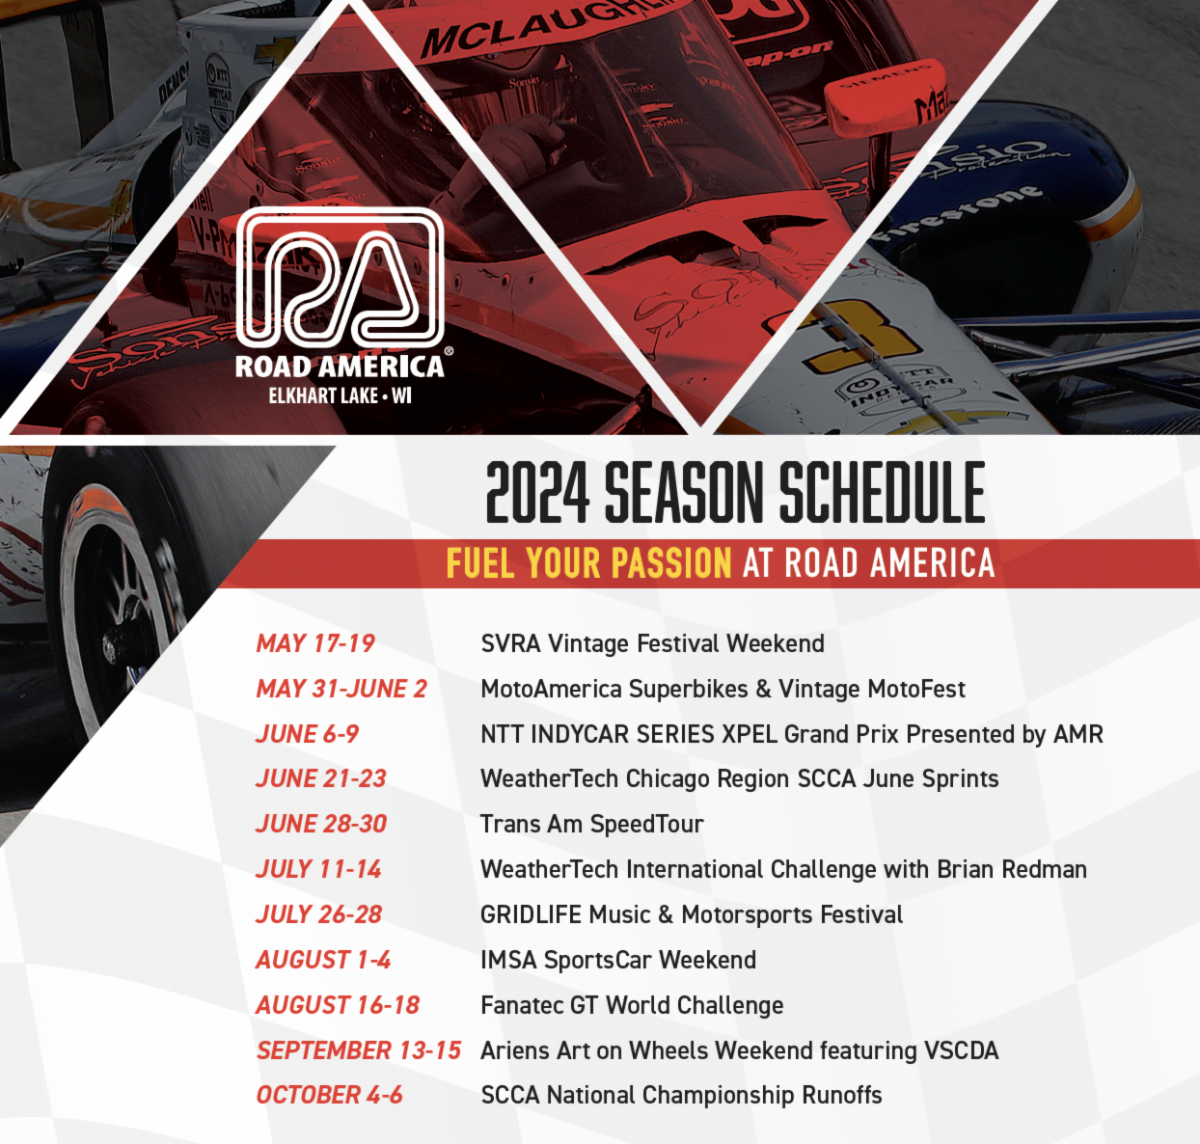 Otto Talks SVRA Vintage Weekend and the Road America Schedule with John Ewert